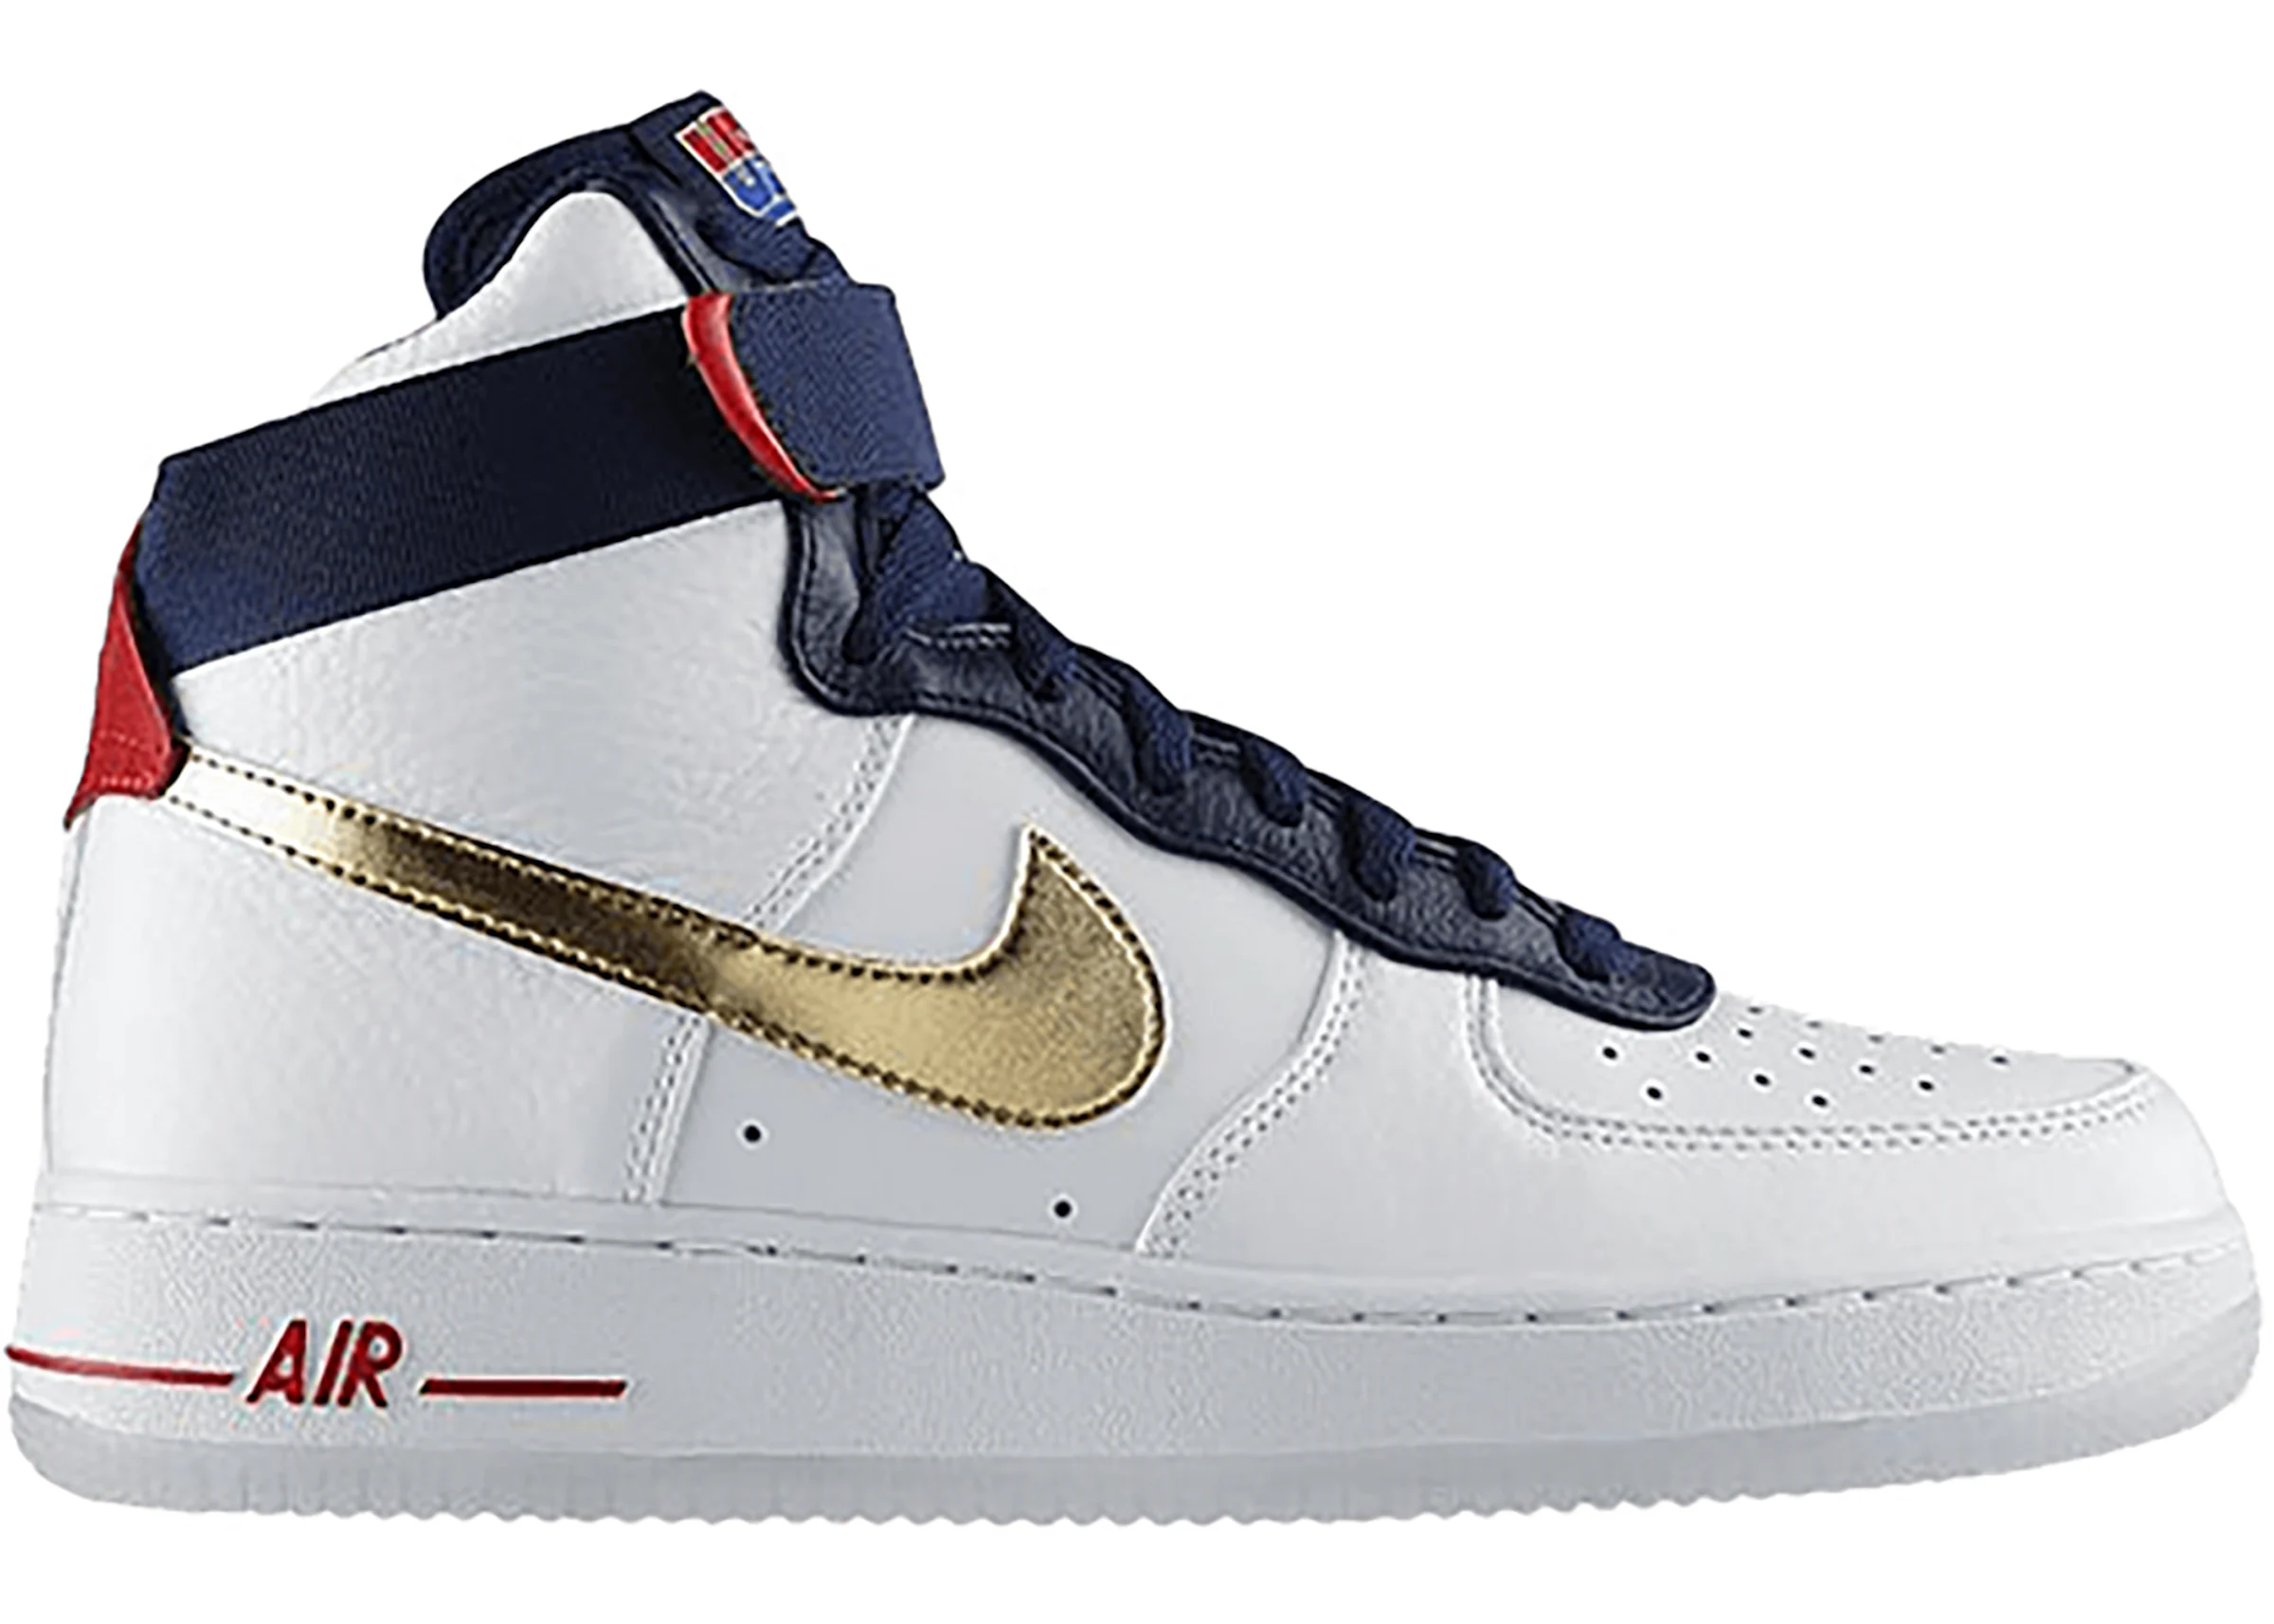 Nike Air Force 1 High Olympic (2012) Men's - 525317-100 - US